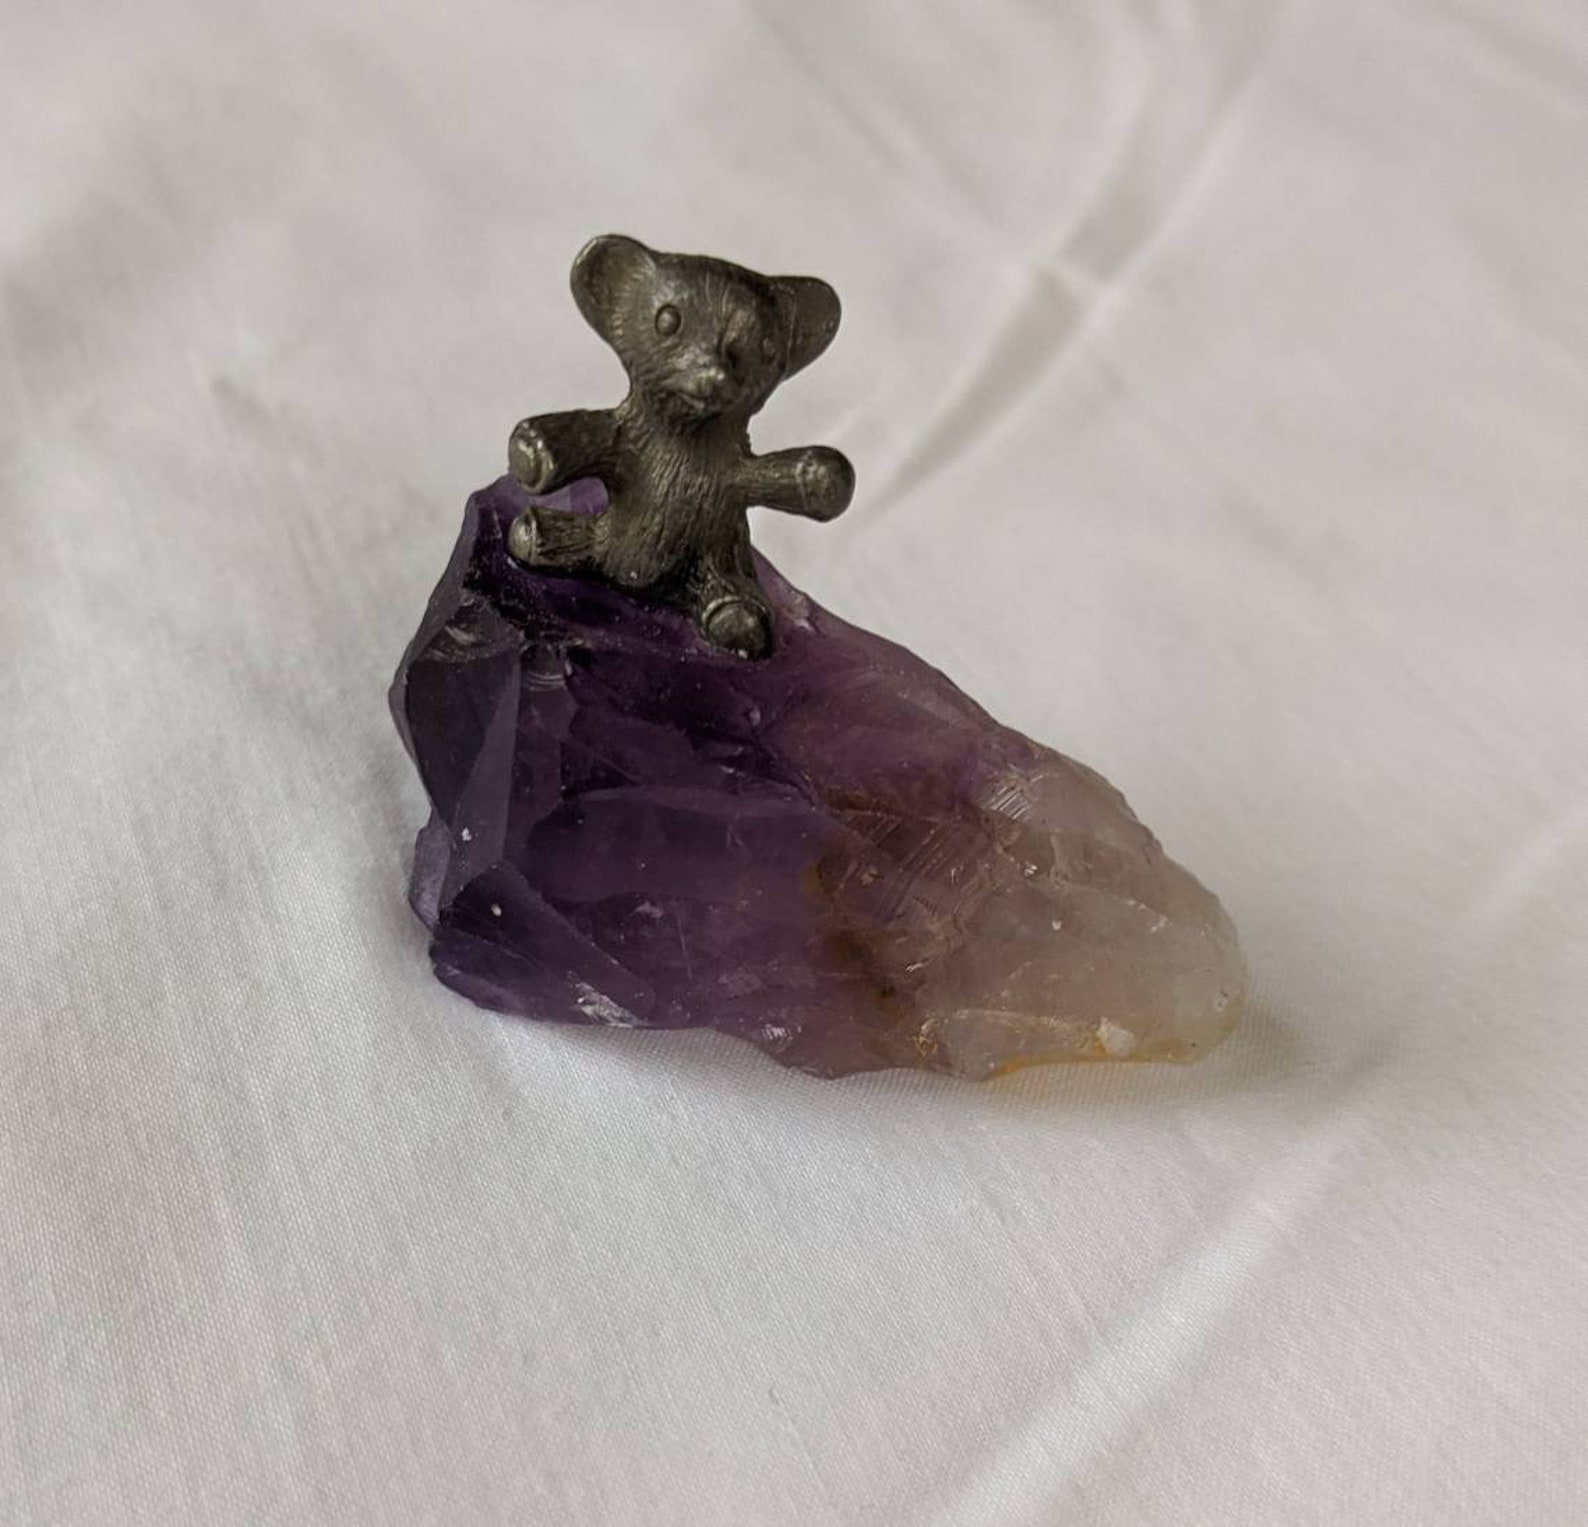 Natural Amethyst with pewter bear figurine. Home nursery | Etsy